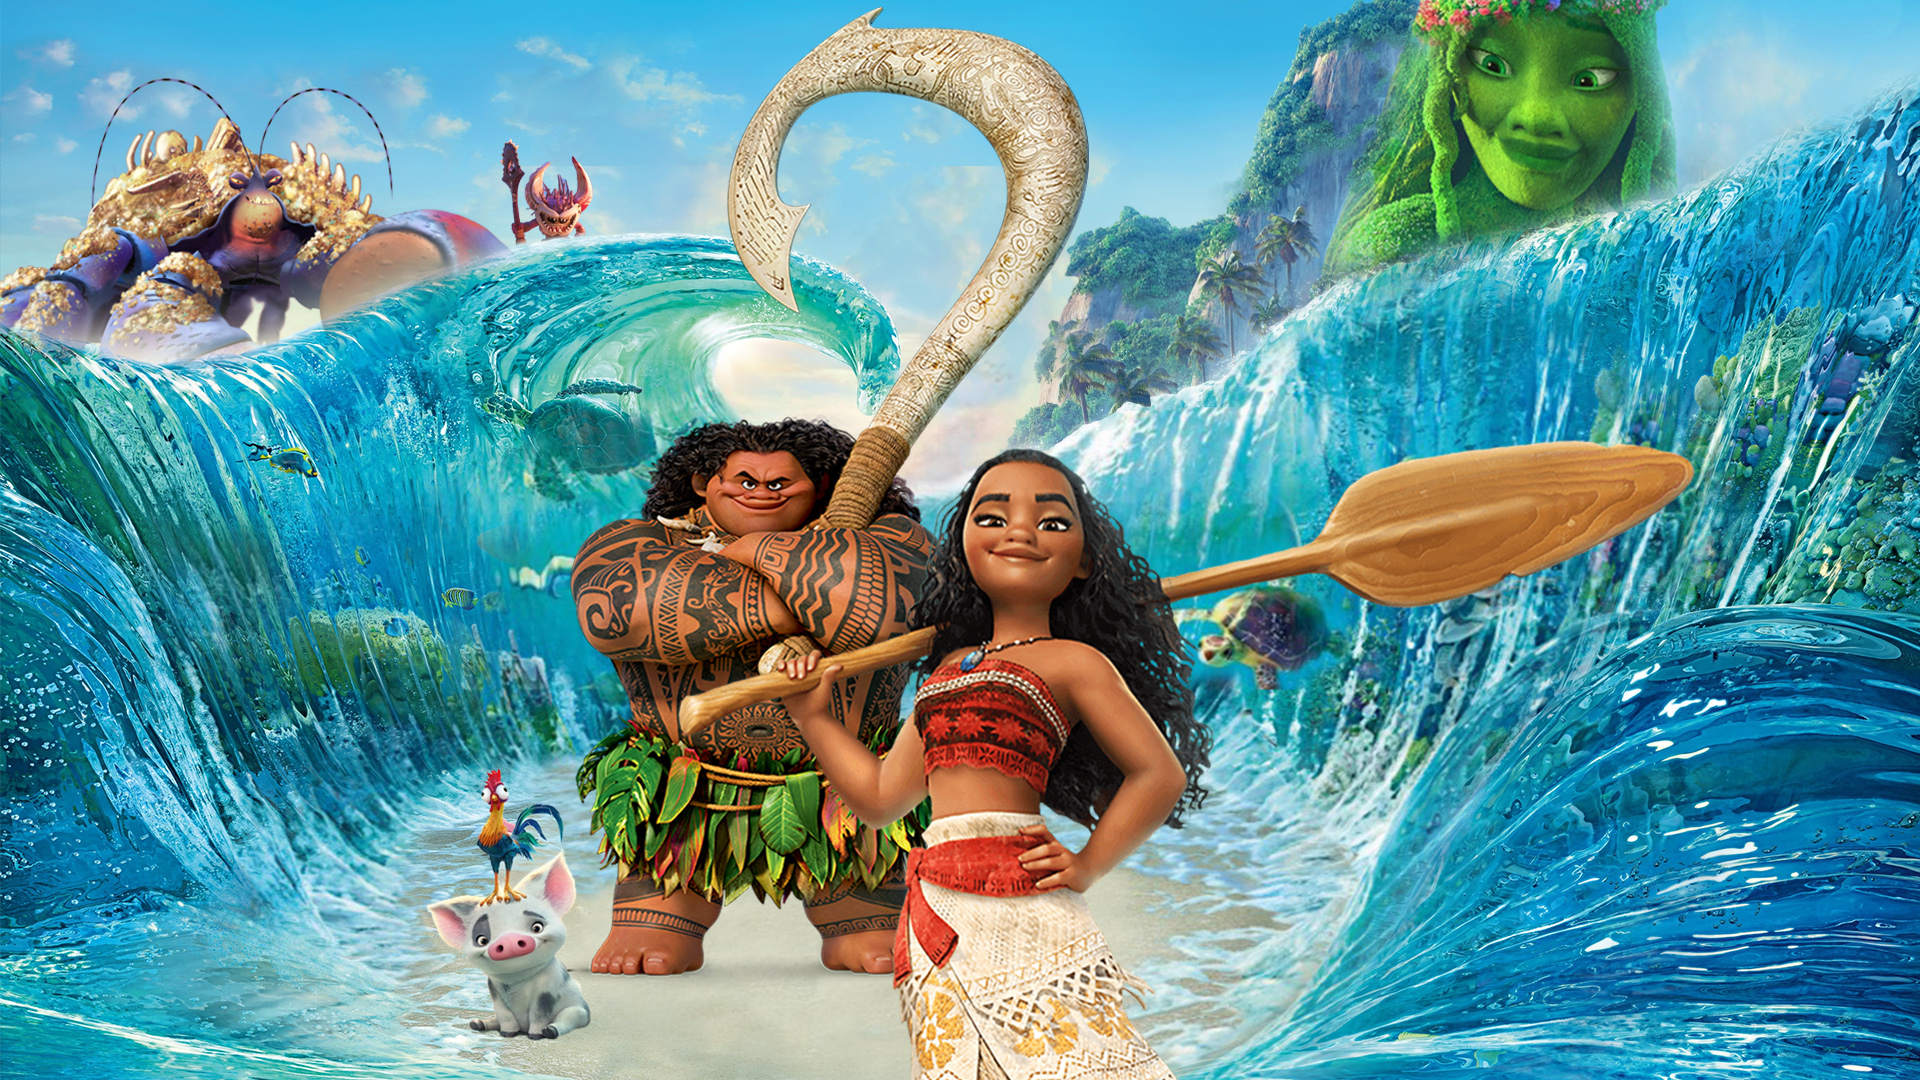 Moana wallpaper Hd Download, Moana Background Images For Des